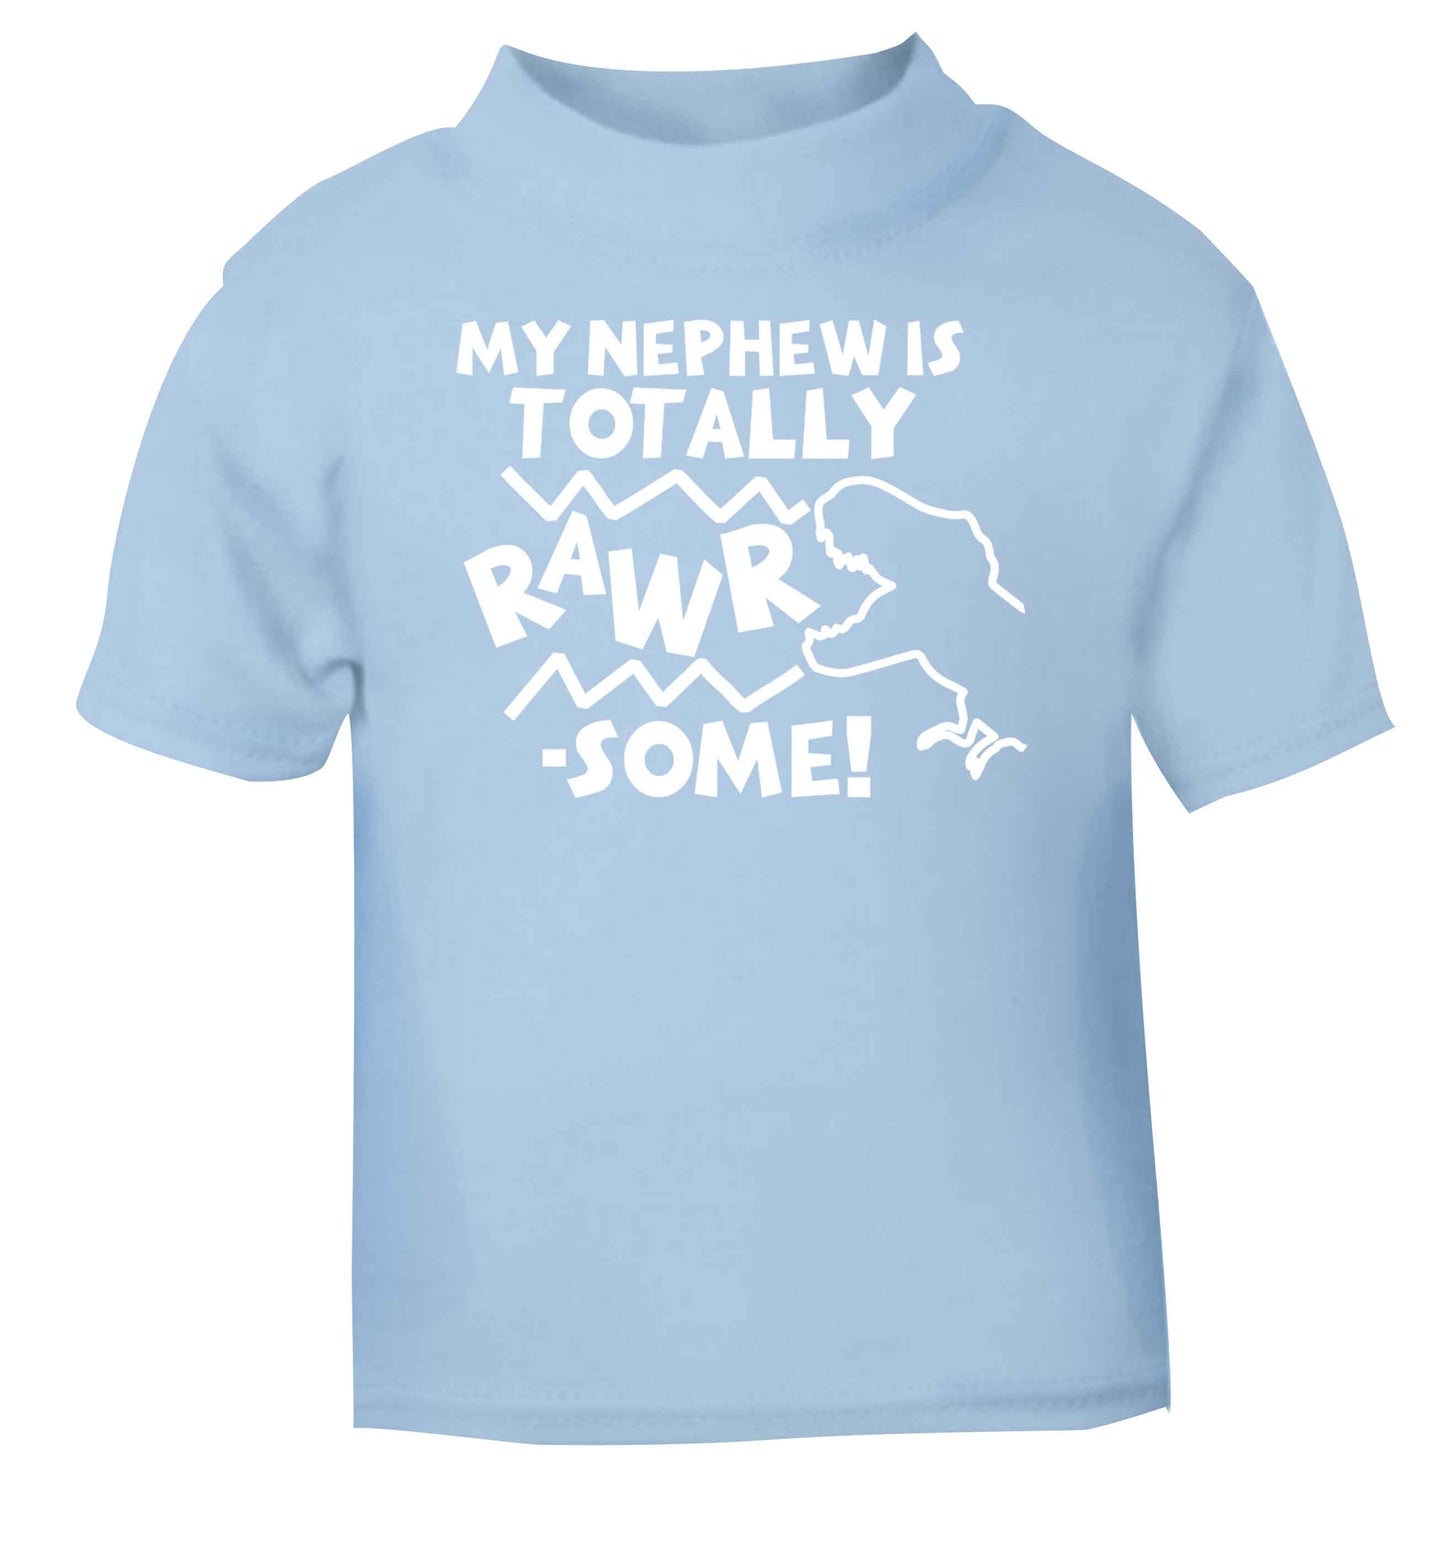 My nephew is totally rawrsome light blue baby toddler Tshirt 2 Years